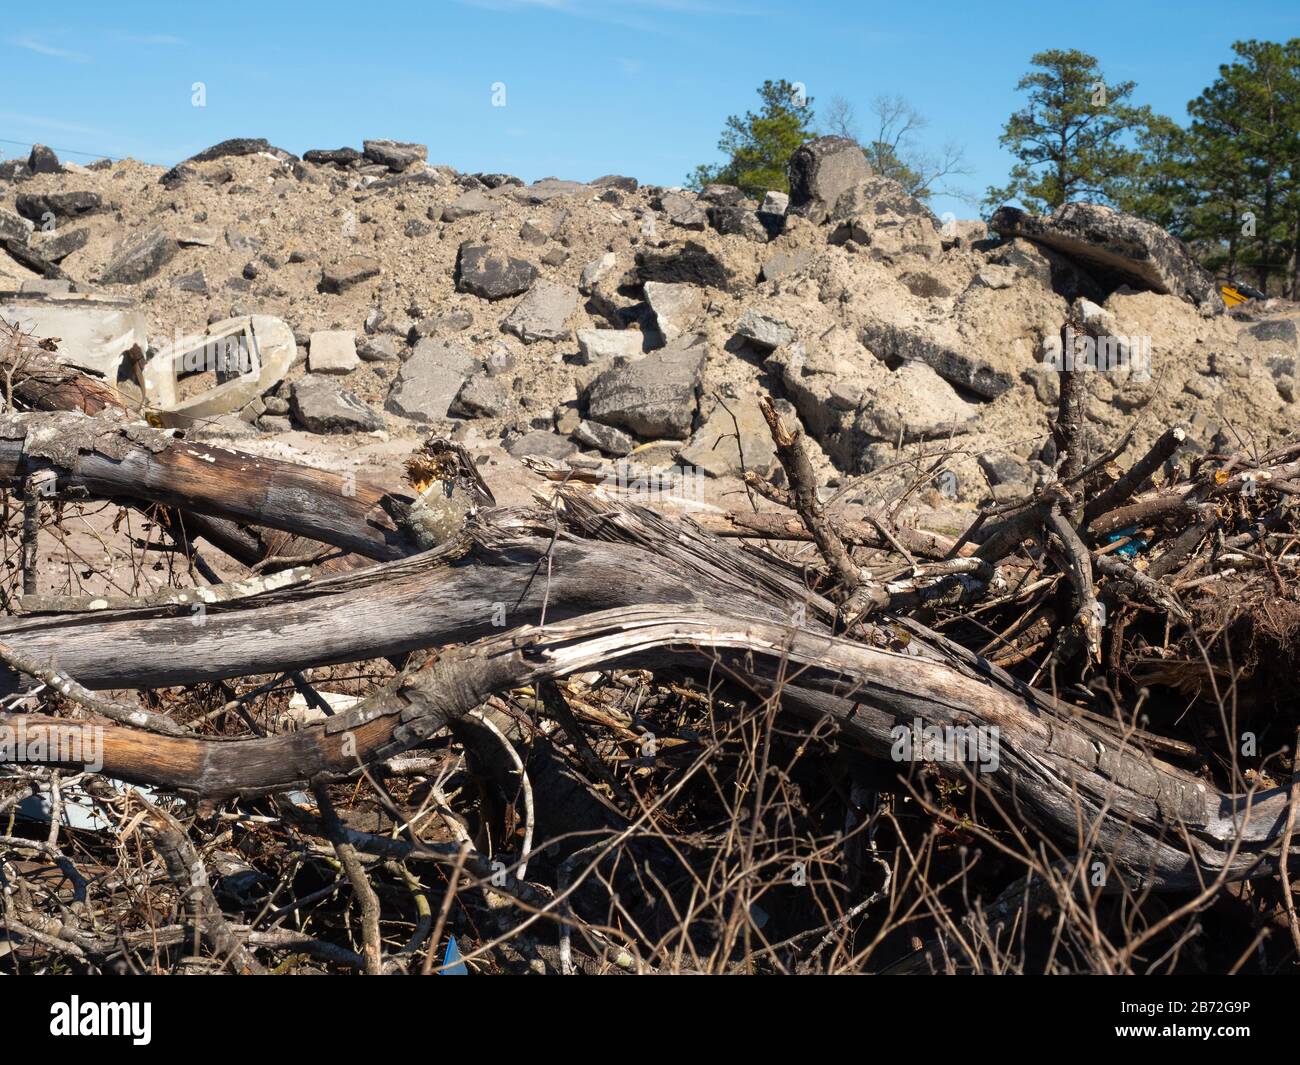 Dead Trees lying prone in front of mountain of Road Rubble, demolition, huge sections of concrete and asphalt road pavement in background View #2 Stock Photo